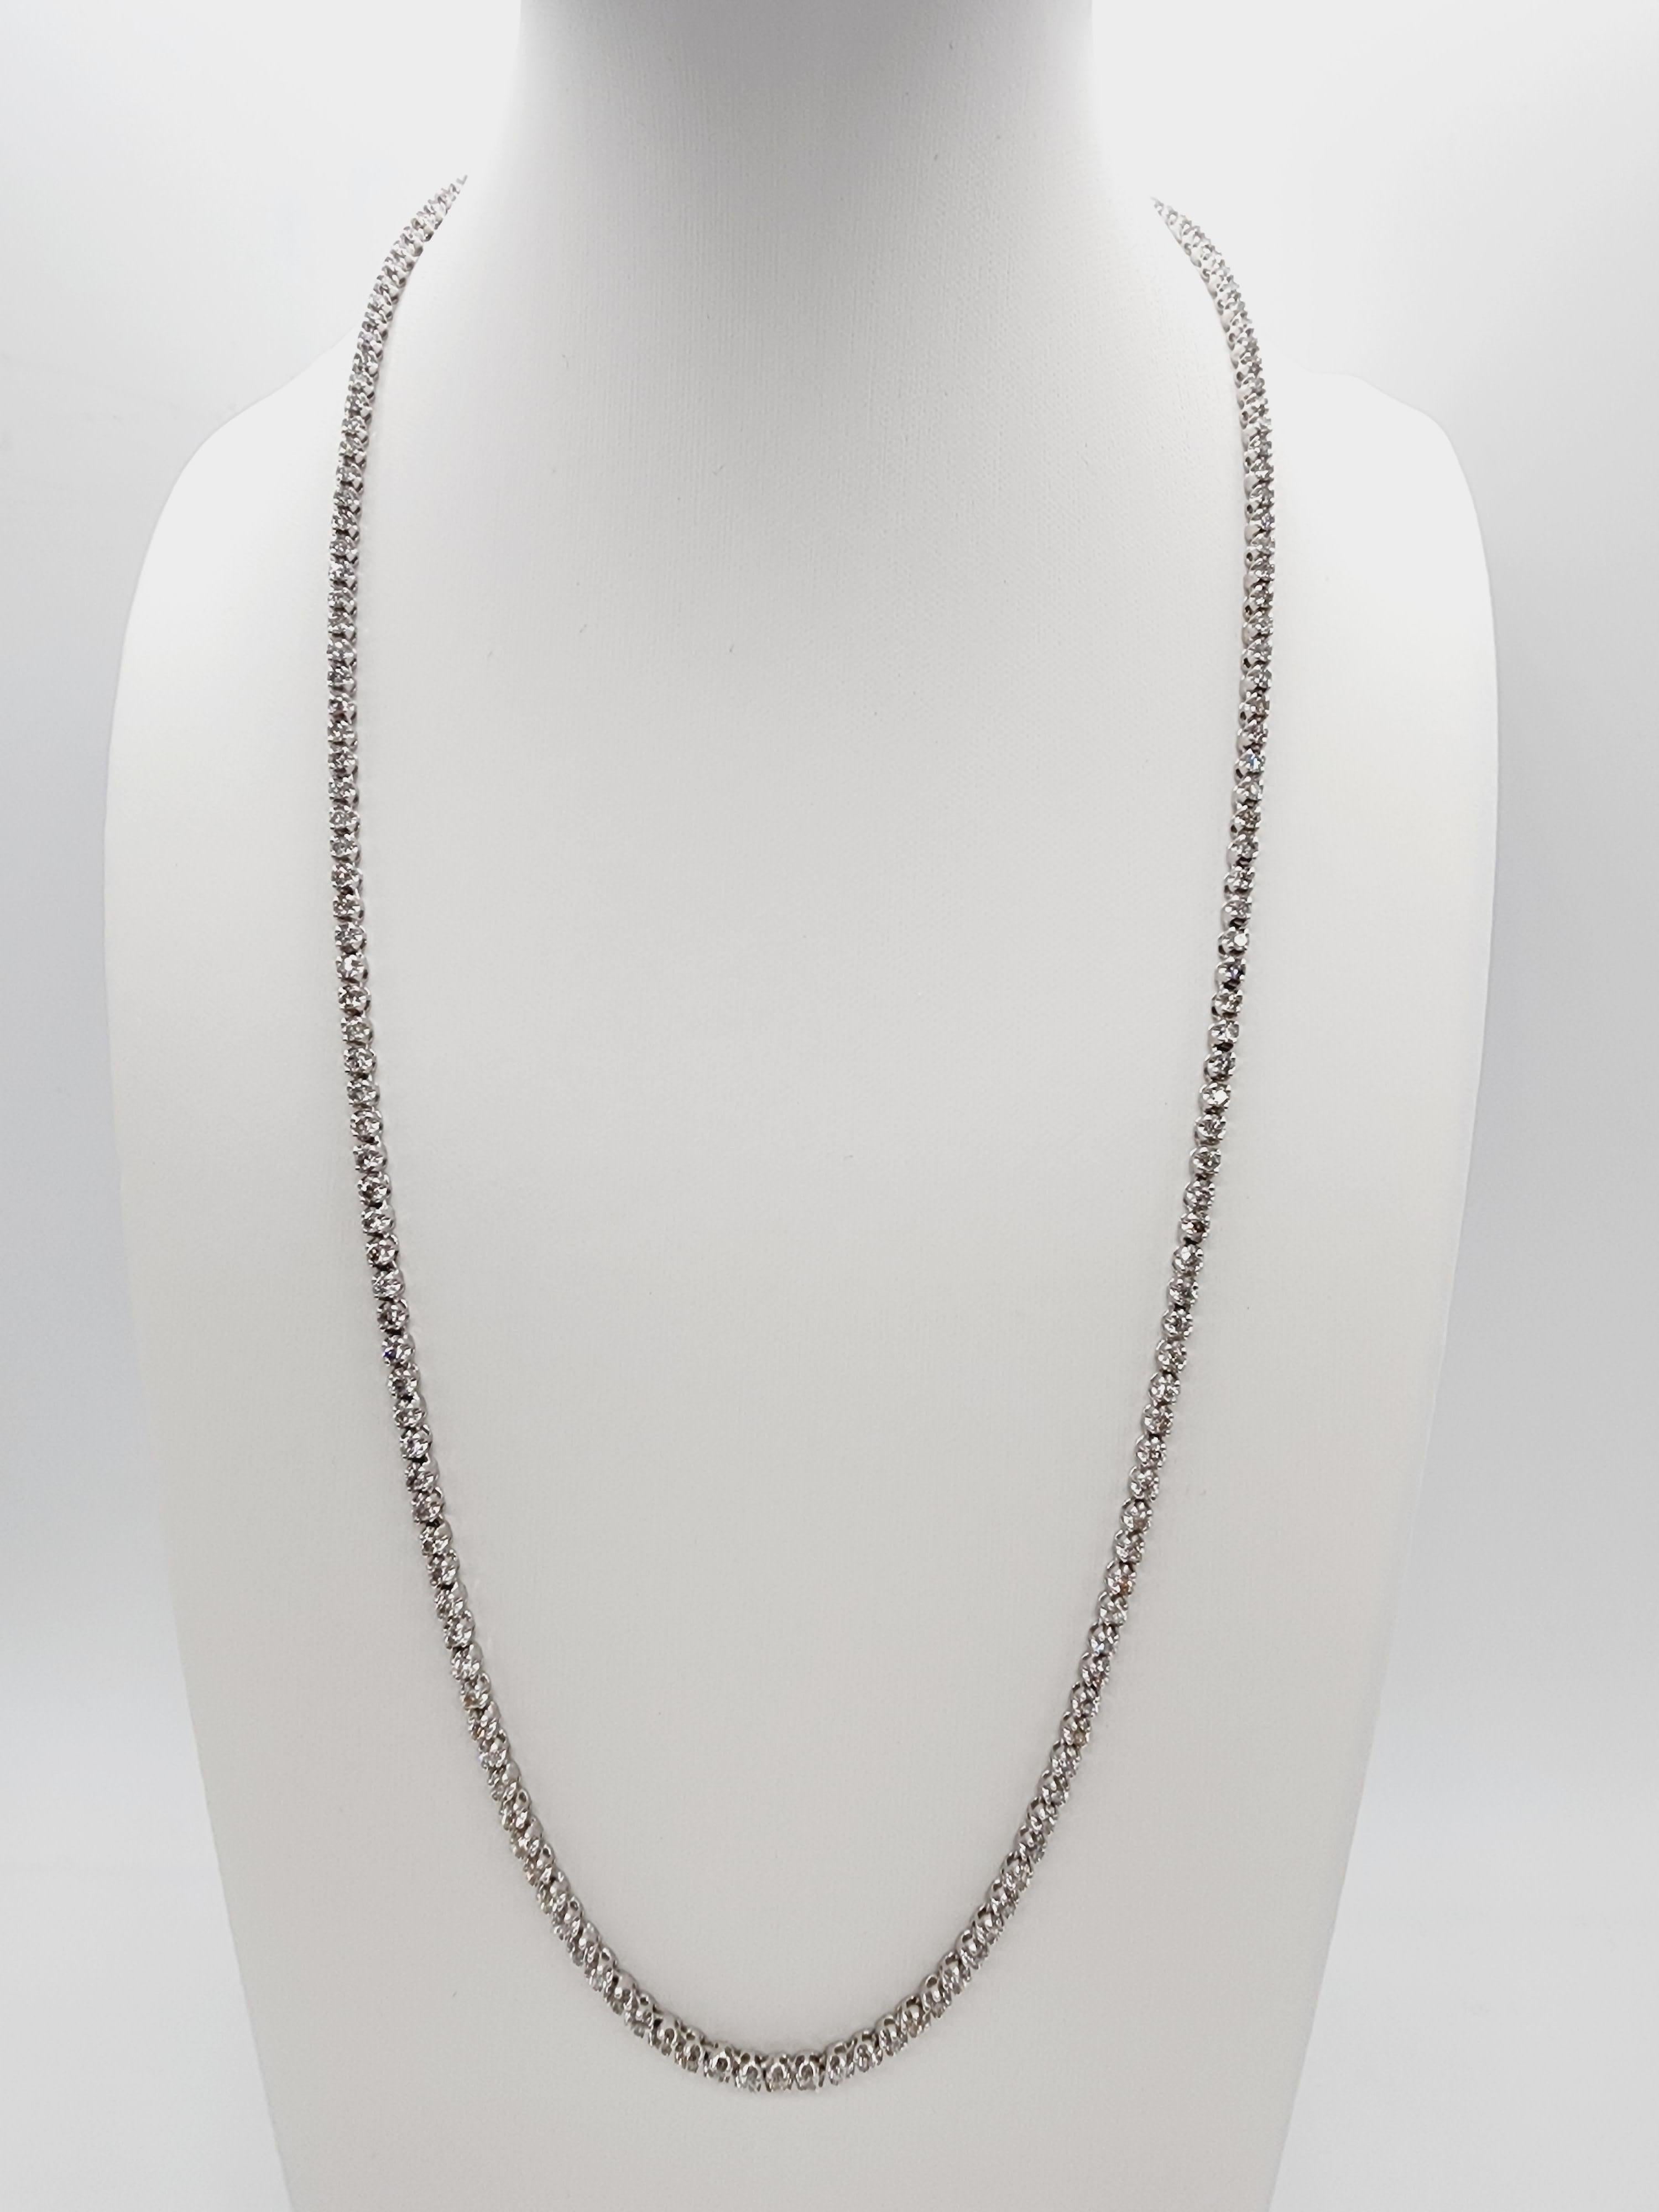 Brilliant and beautiful buttercup necklace, natural round-brilliant cut white diamonds clean and excellent shine. 14k white gold buttercup setting. 
16 inch length. Average G Color, SI Clarity.  2.9 mm wide.